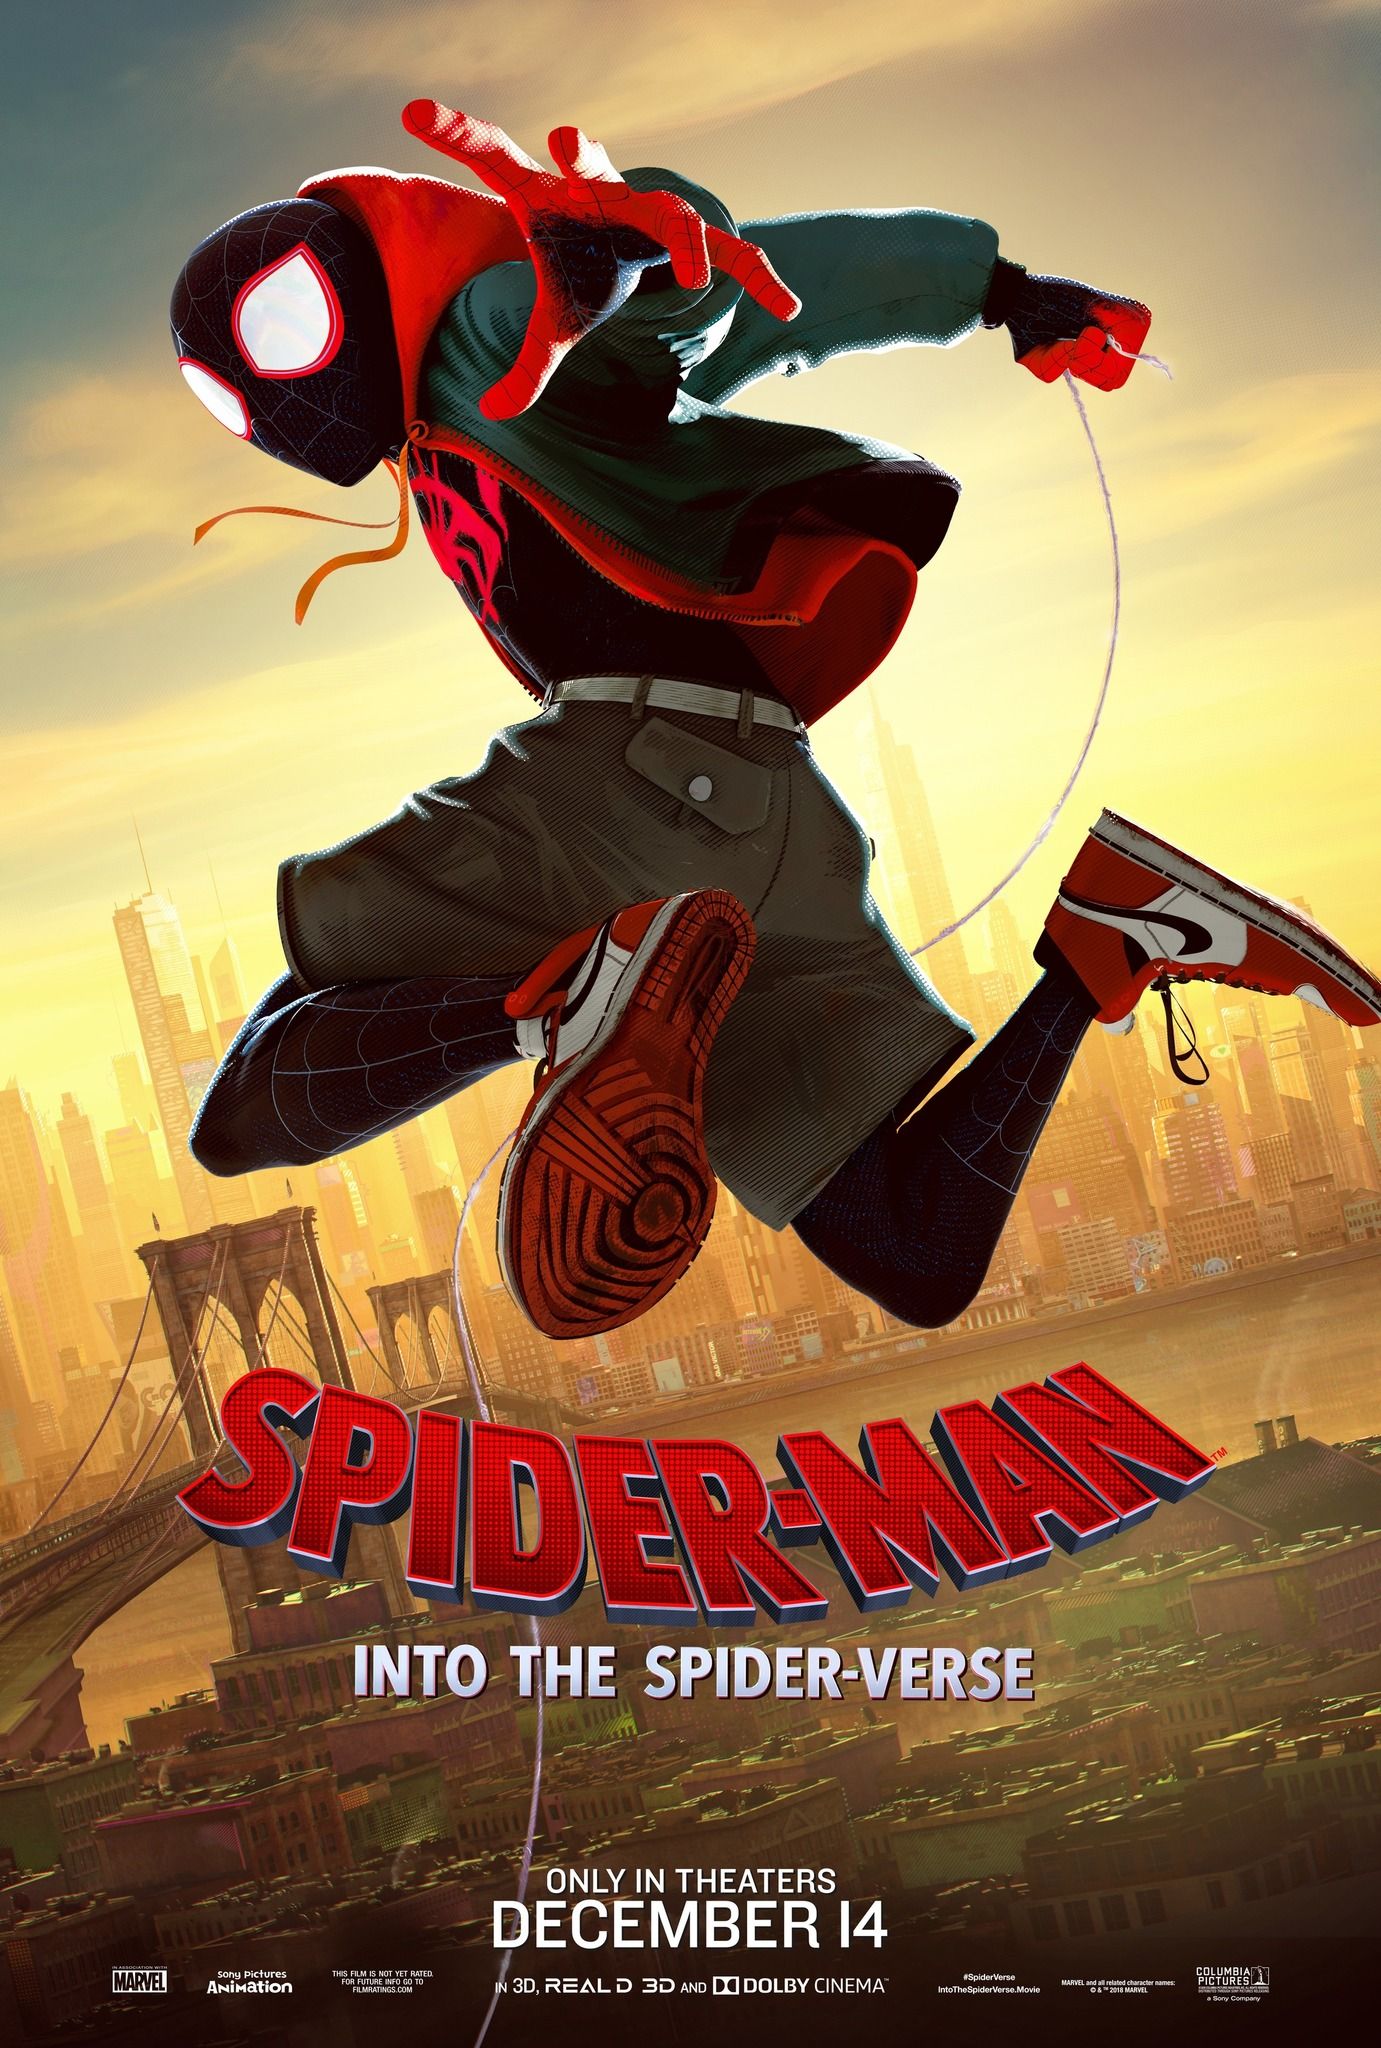 SpiderMan Into the Spider Verse (2018) Hindi Dubbed Full Movie